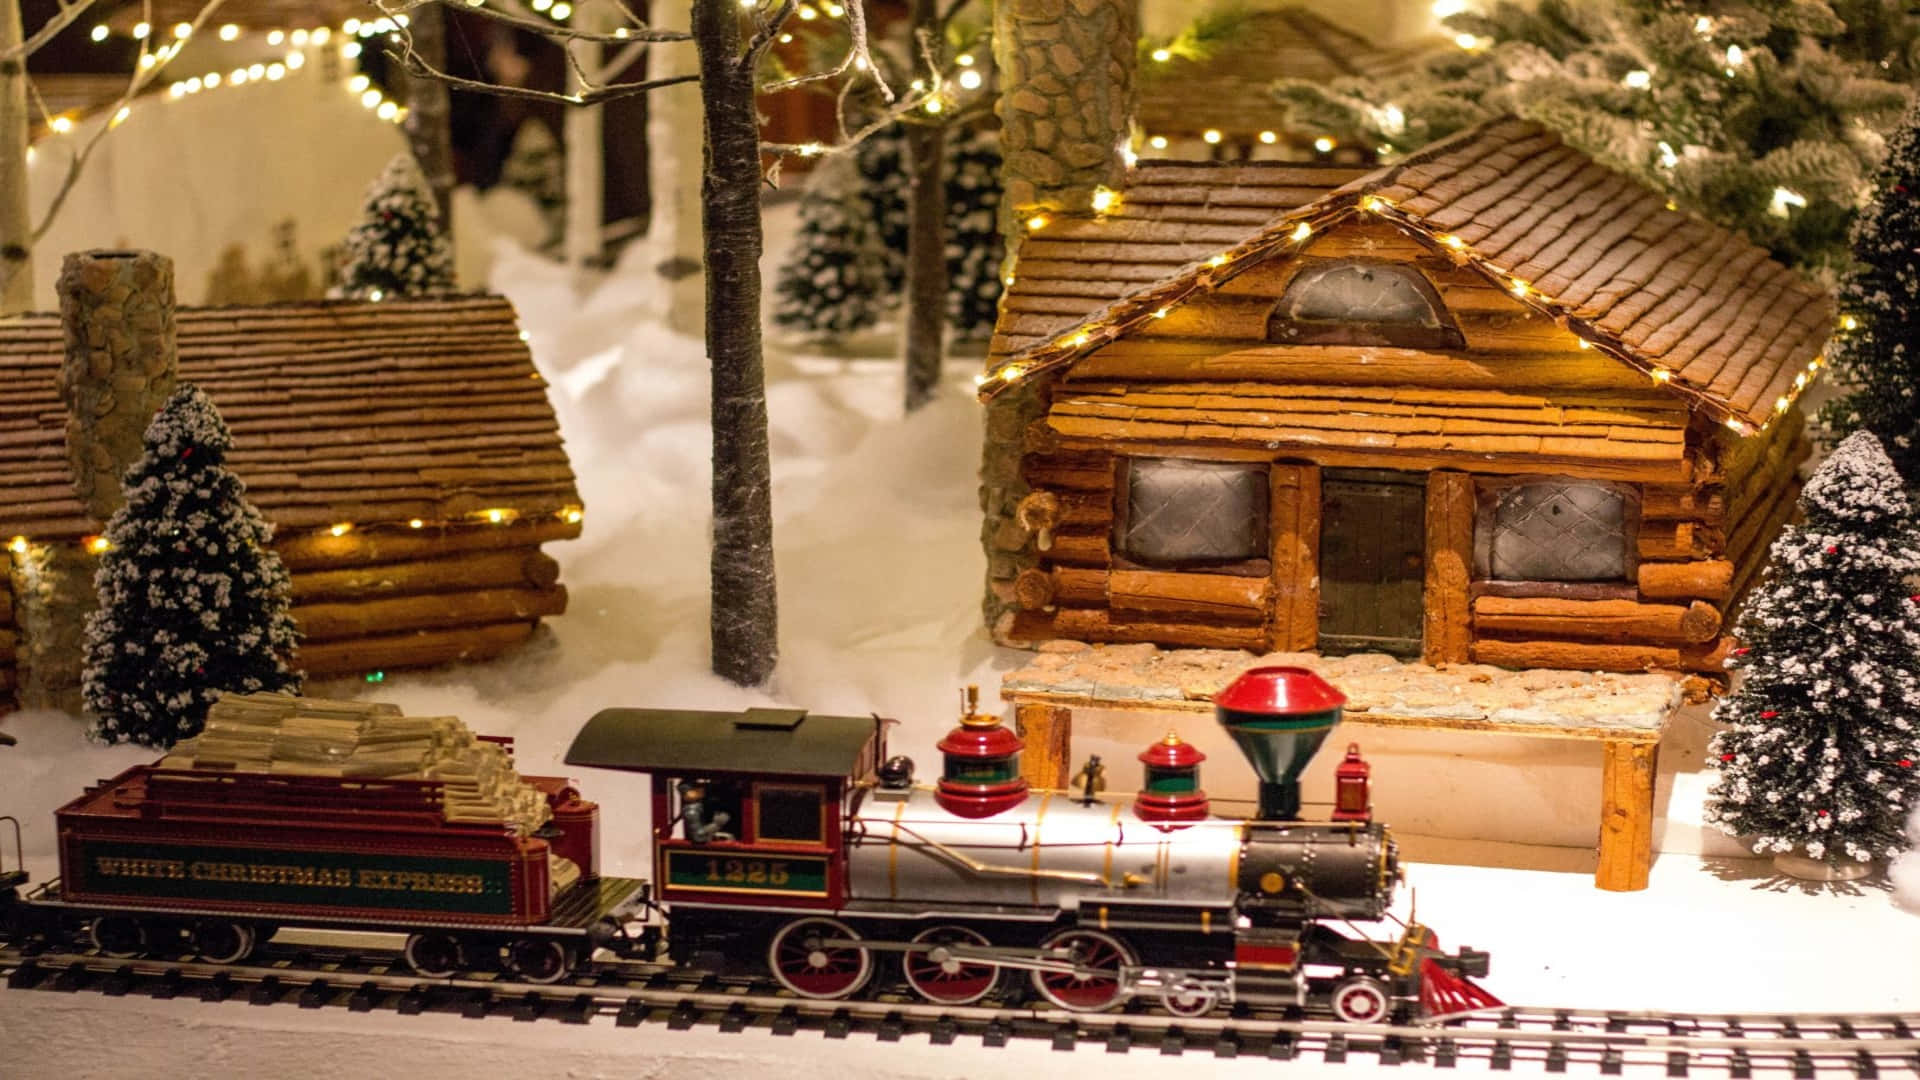 Train And Christmas Village Holiday Teams Background